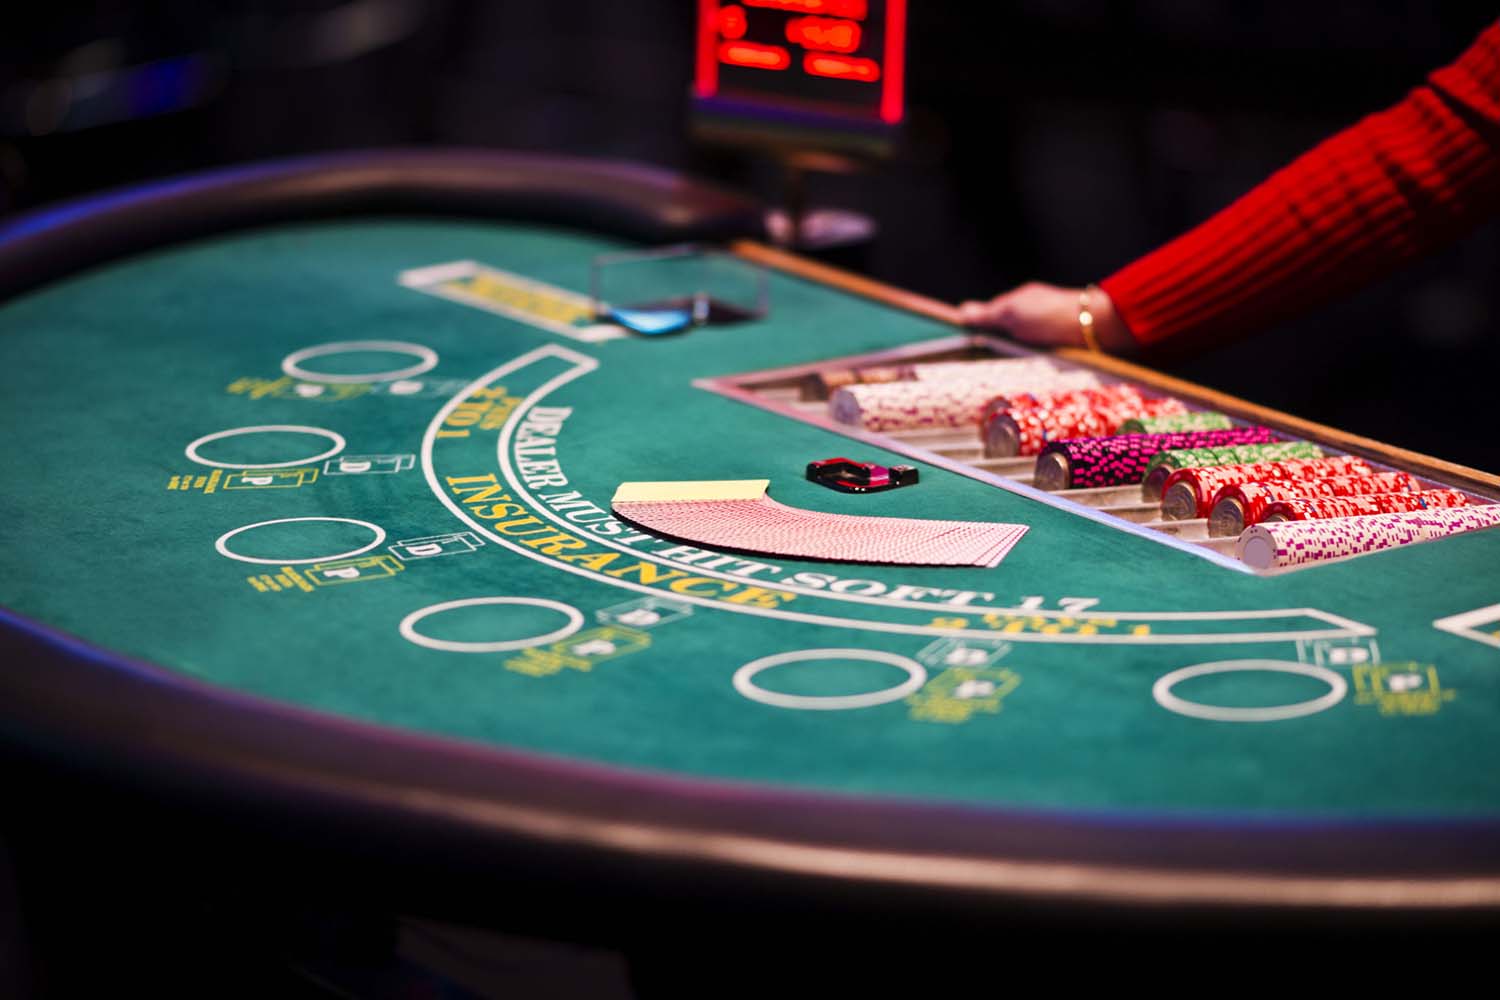 Play Live Dealer Games at the Best Online Live Casinos in the UK